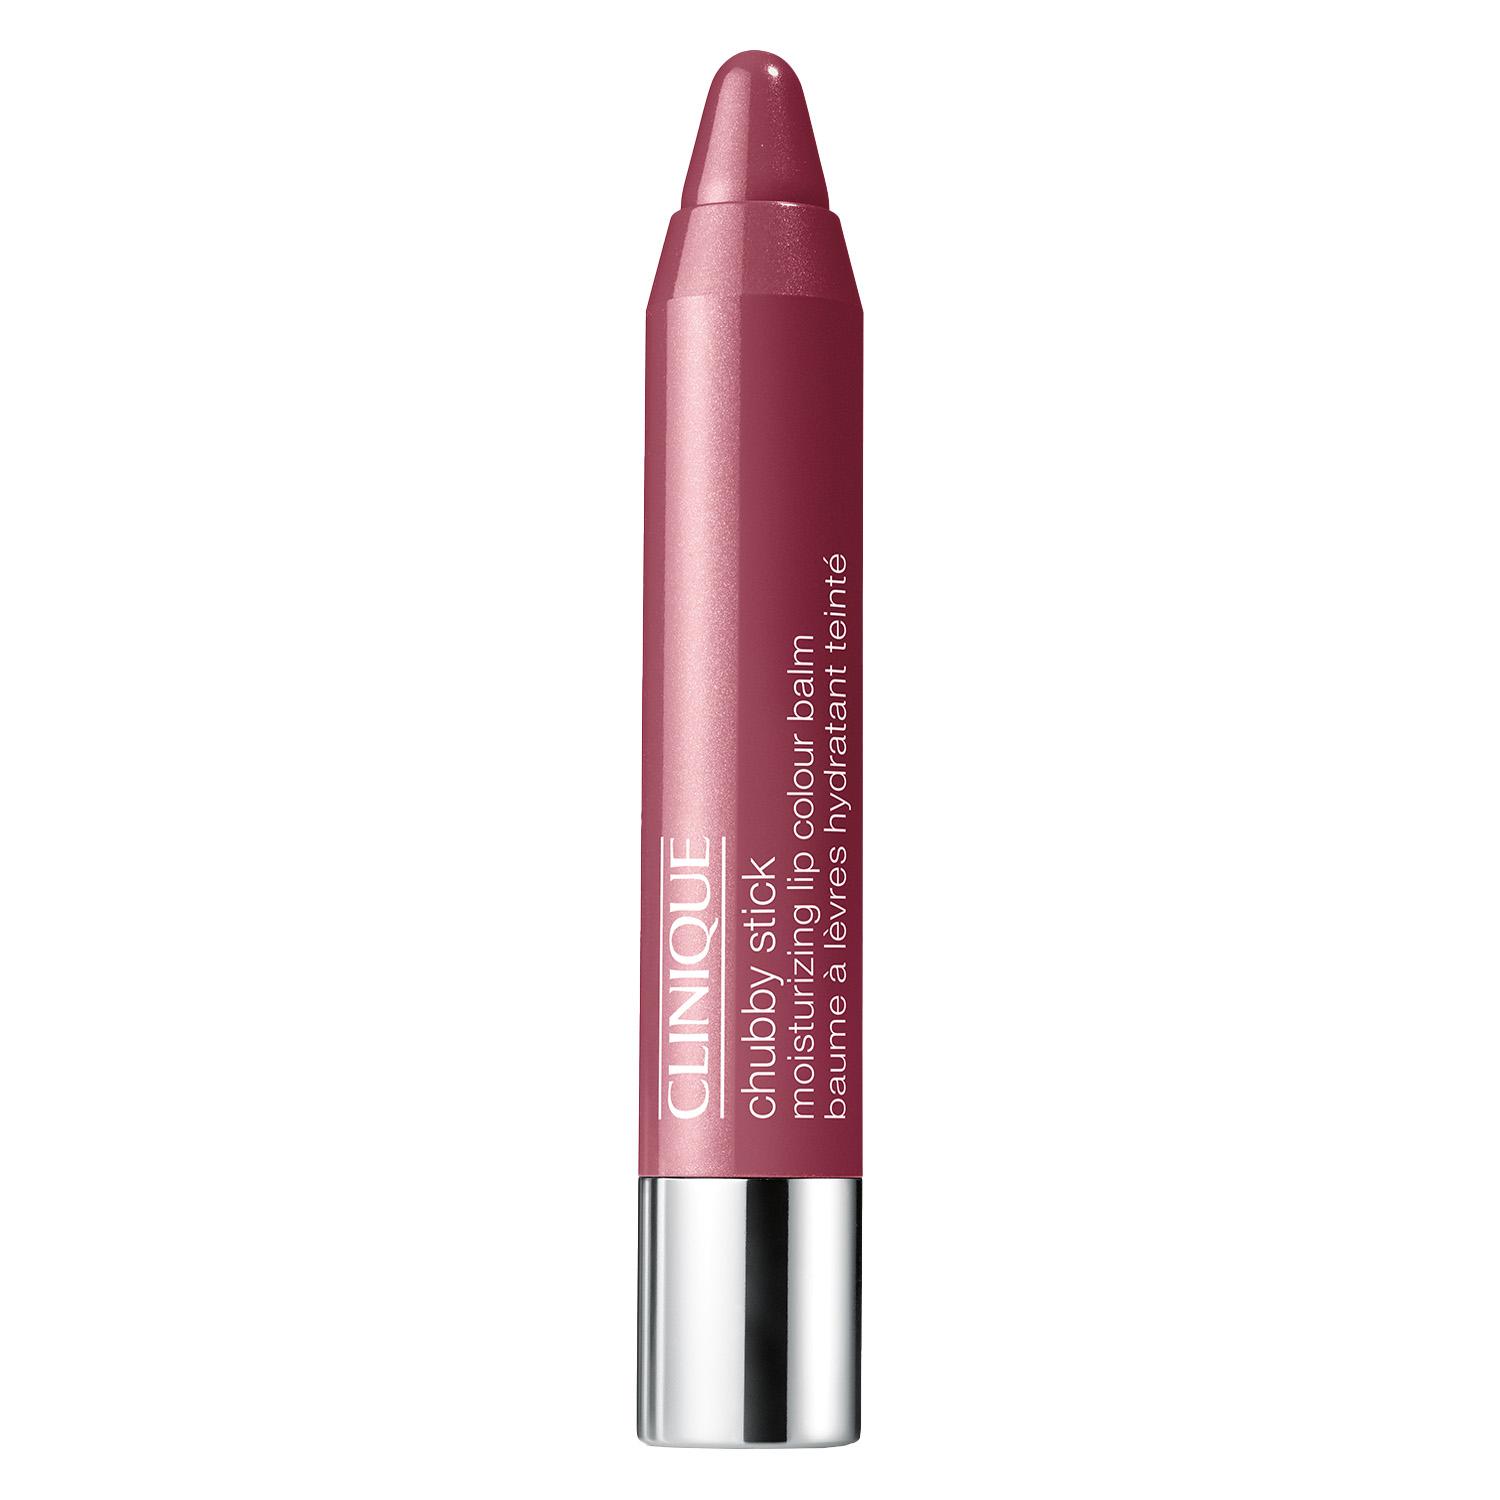 Clinique Lips - Chubby Stick Broadest Berry 30